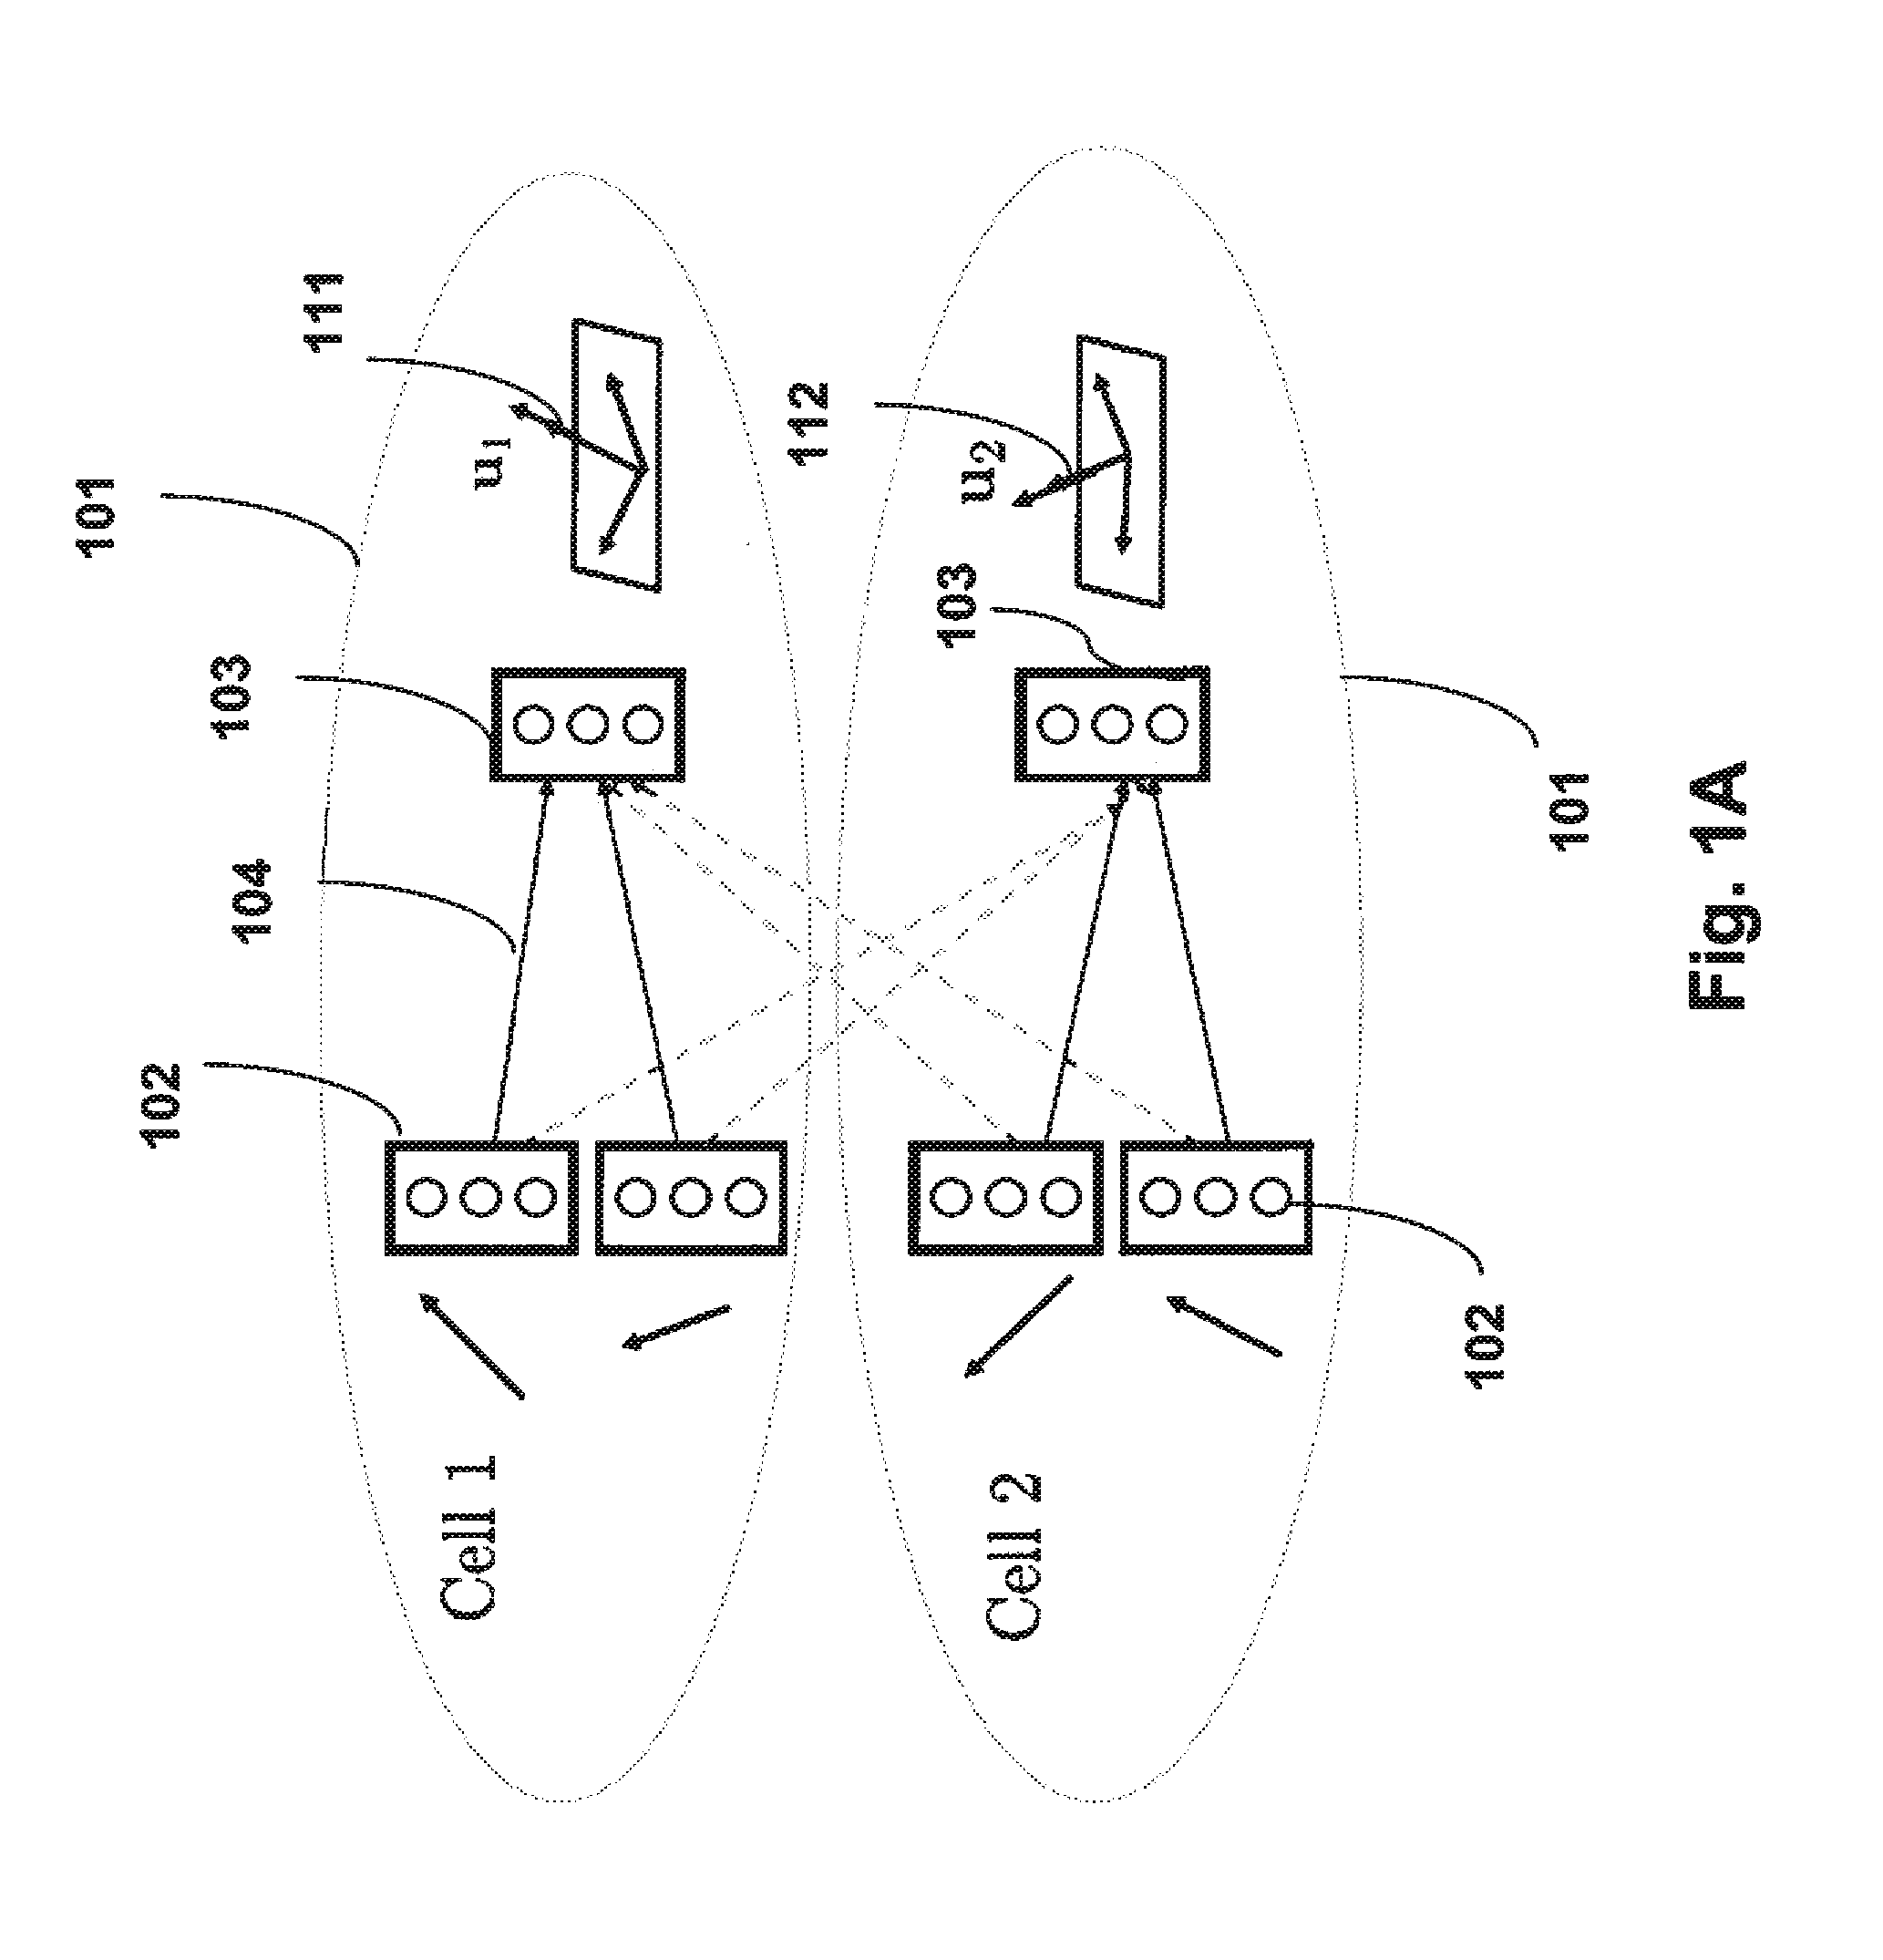 Method for Reducing Interference in Multi-Cell Multi-User Wireless Networks